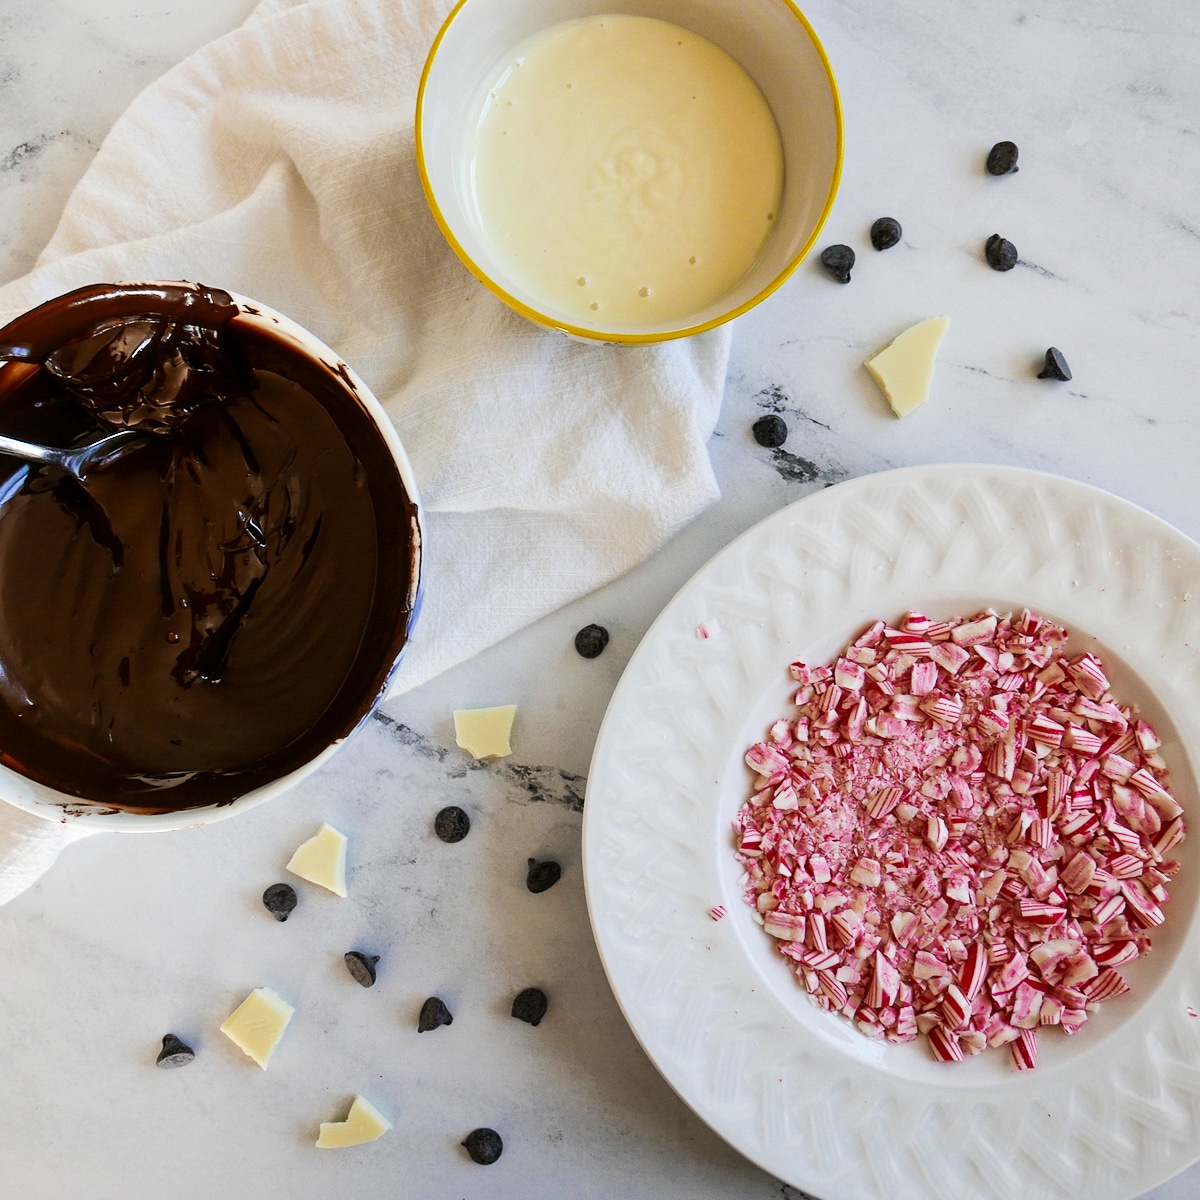 plate of crushed peppermint candy and two bowls of chocolate with spoon.